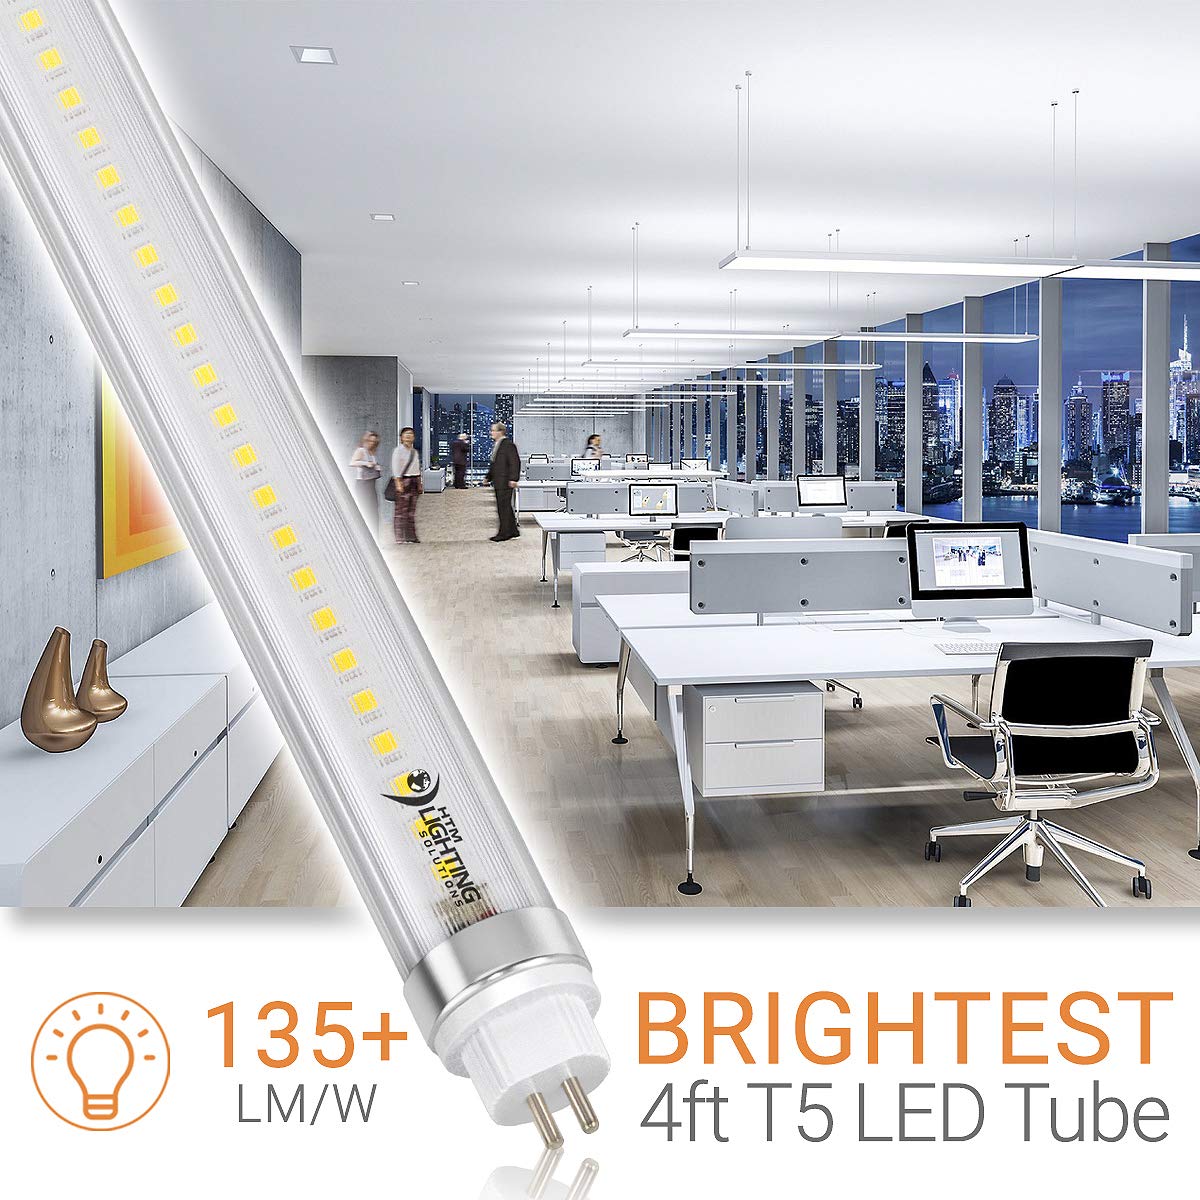 4ft 24W T5 High Output LED Tube Light, 45.75", F54T5 Equal, 5000K (Cool White), Clear Lens, 3500 lm, G5 Mini Base, 100-277V, Ballast Bypass, Dual-End Powered, LED Shop Light, UL-Listed (4-Pack)